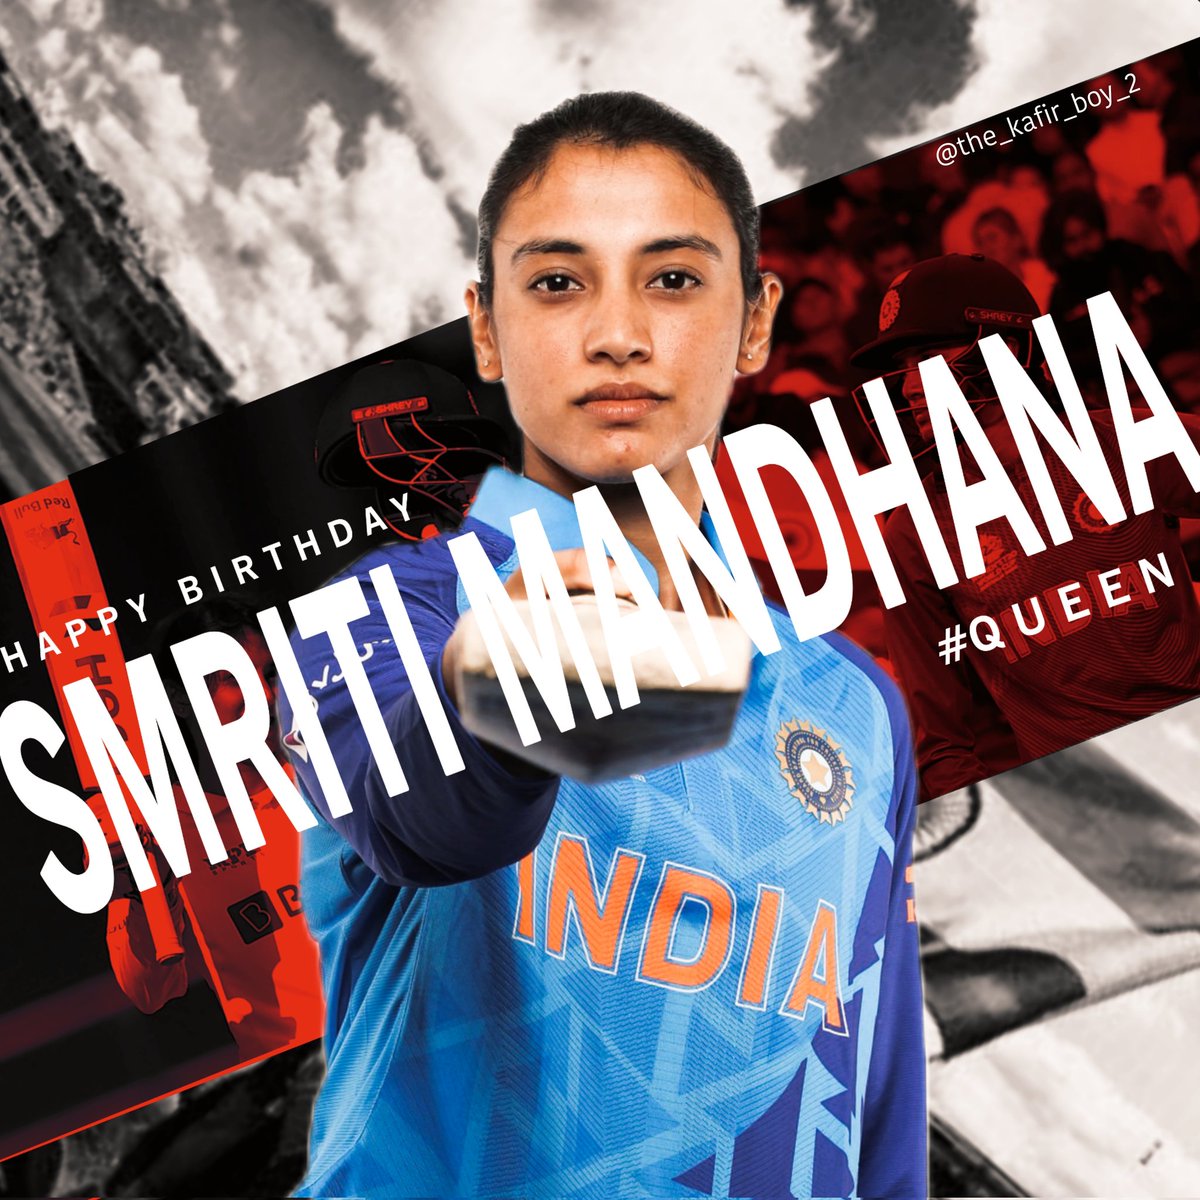 - most T20i fifty for india
- fastest 1000 T20i &2000 ODI runs for India
-Third most ODI runs for India (3084)
-Second most T20I runs for India (2854)
-Fastest fifty by Indian women's batter in WT20Is (23)
-Second most fifties in WT20Is (22)

Happy Birthday queen Smriti Mandhana